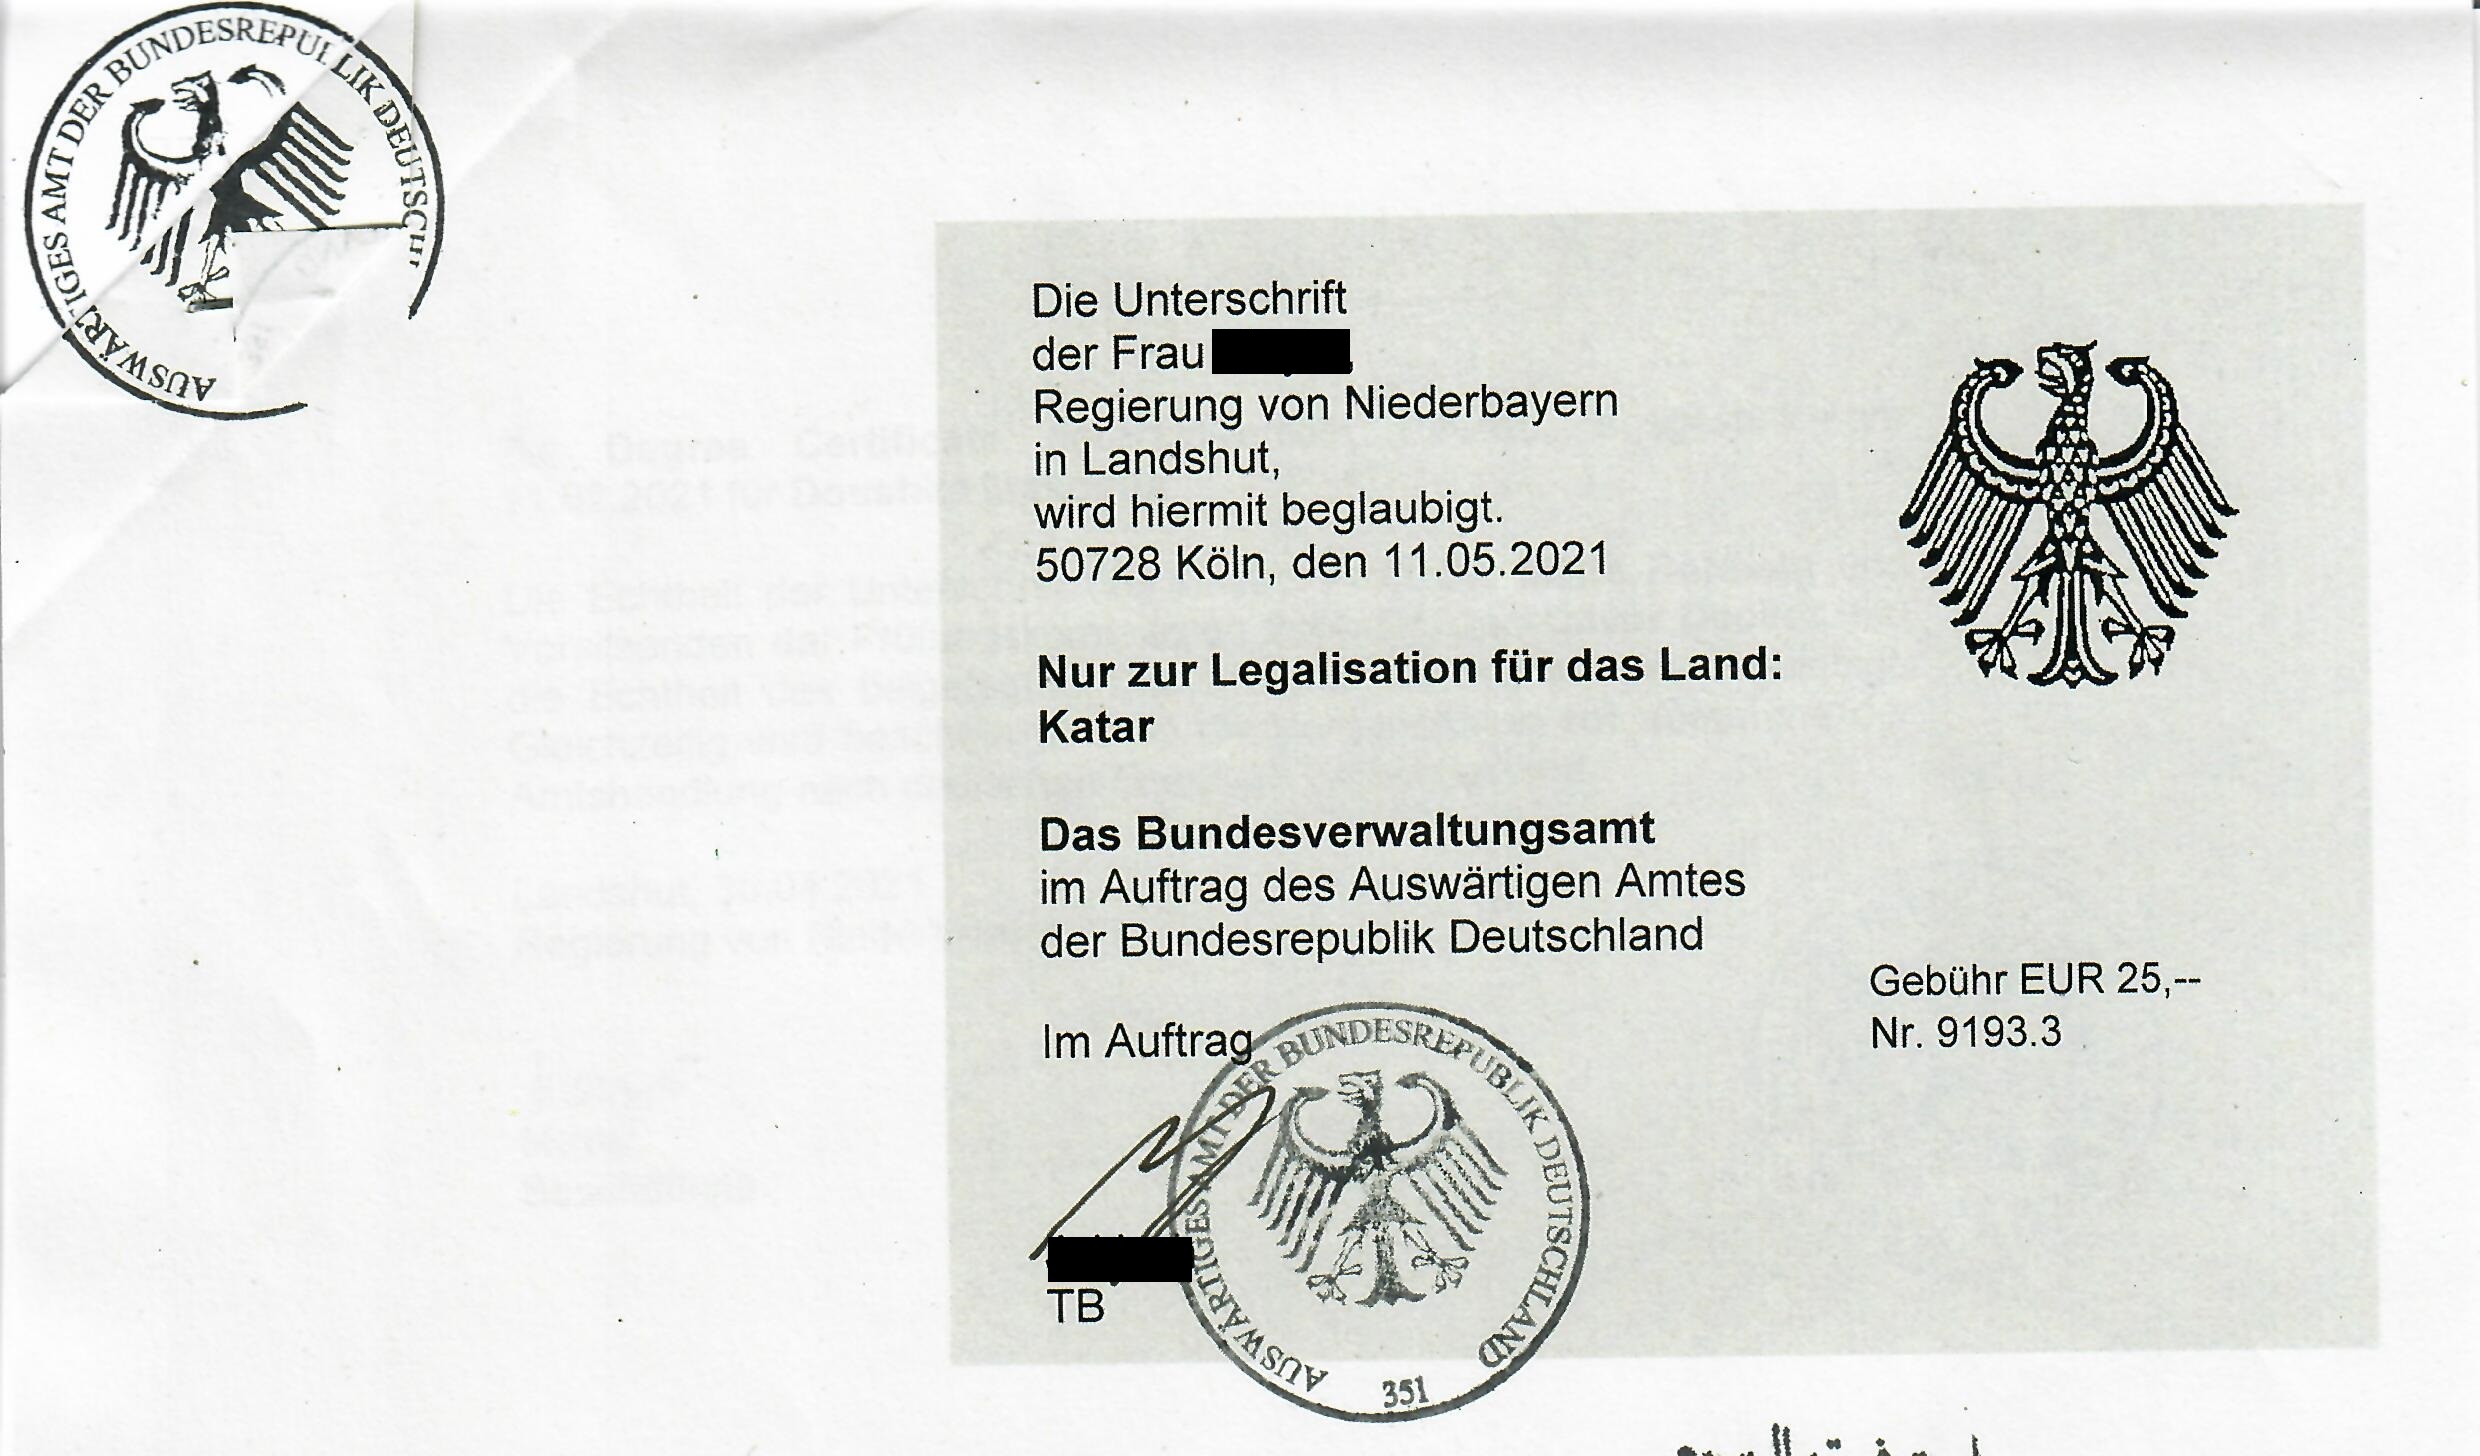 The verification of the Foreign Ministry of the Federal Republic of Germany